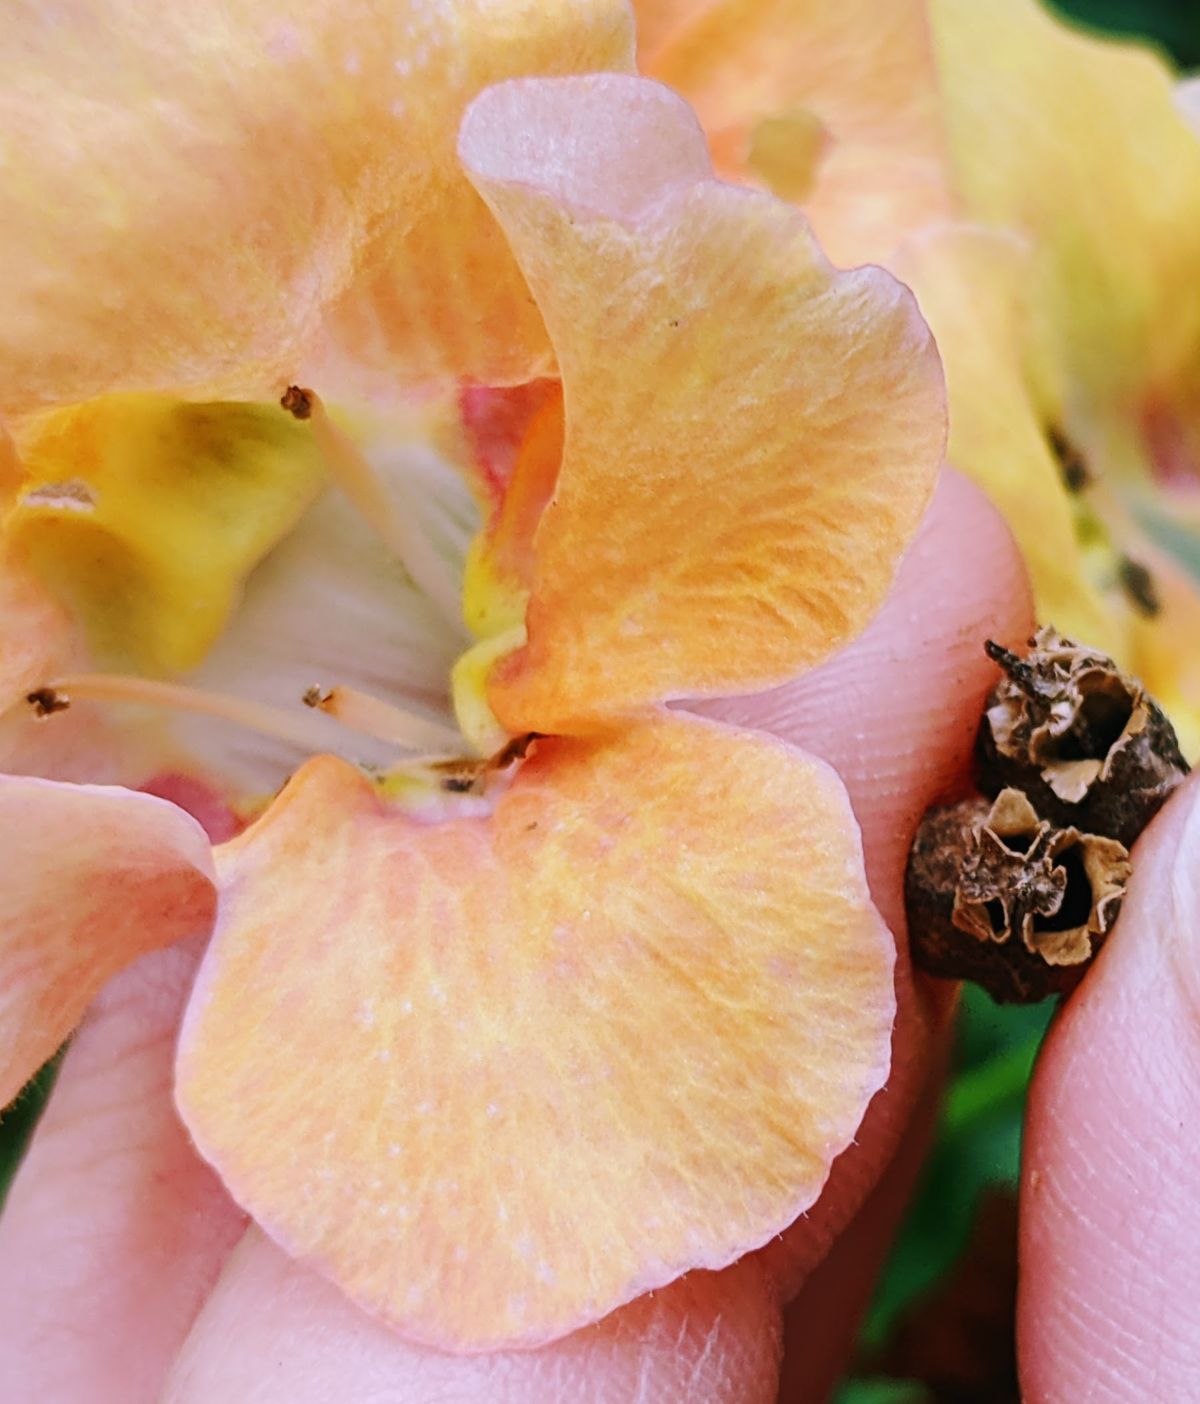 Harvesting snapdragon seed heads, showing them next to peach colored snapdragon bloom